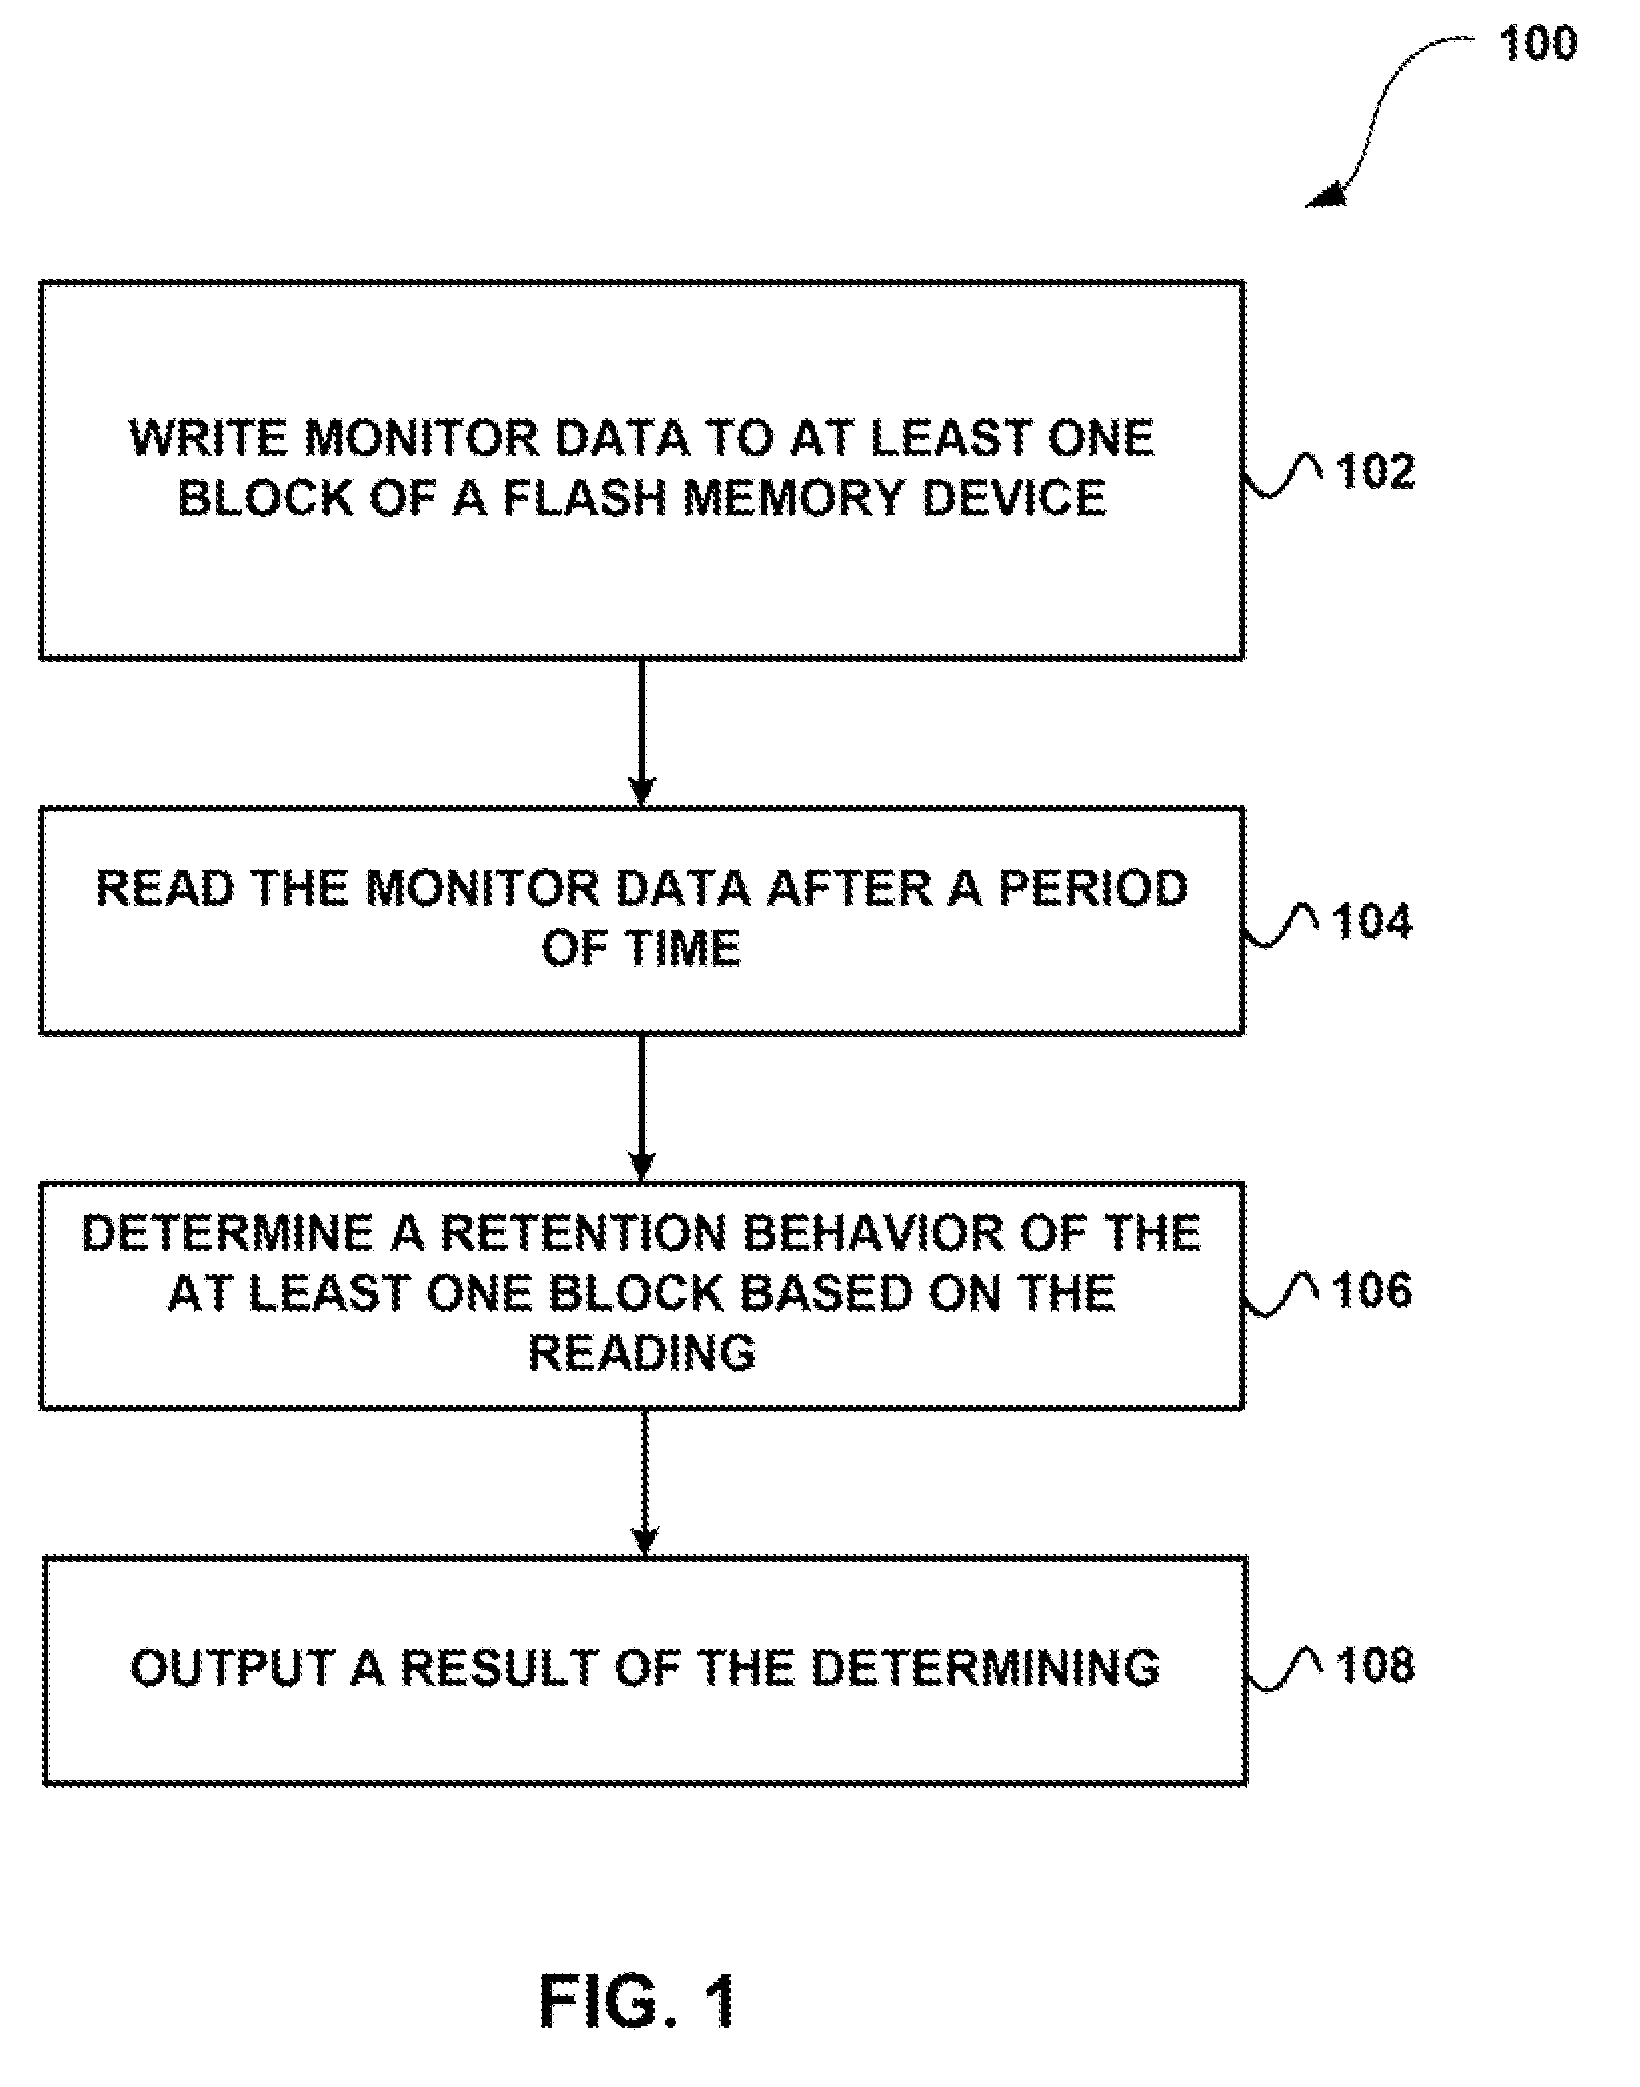 System, method, and computer program product for analyzing monitor data information from a plurality of memory devices having finite endurance and/or retention